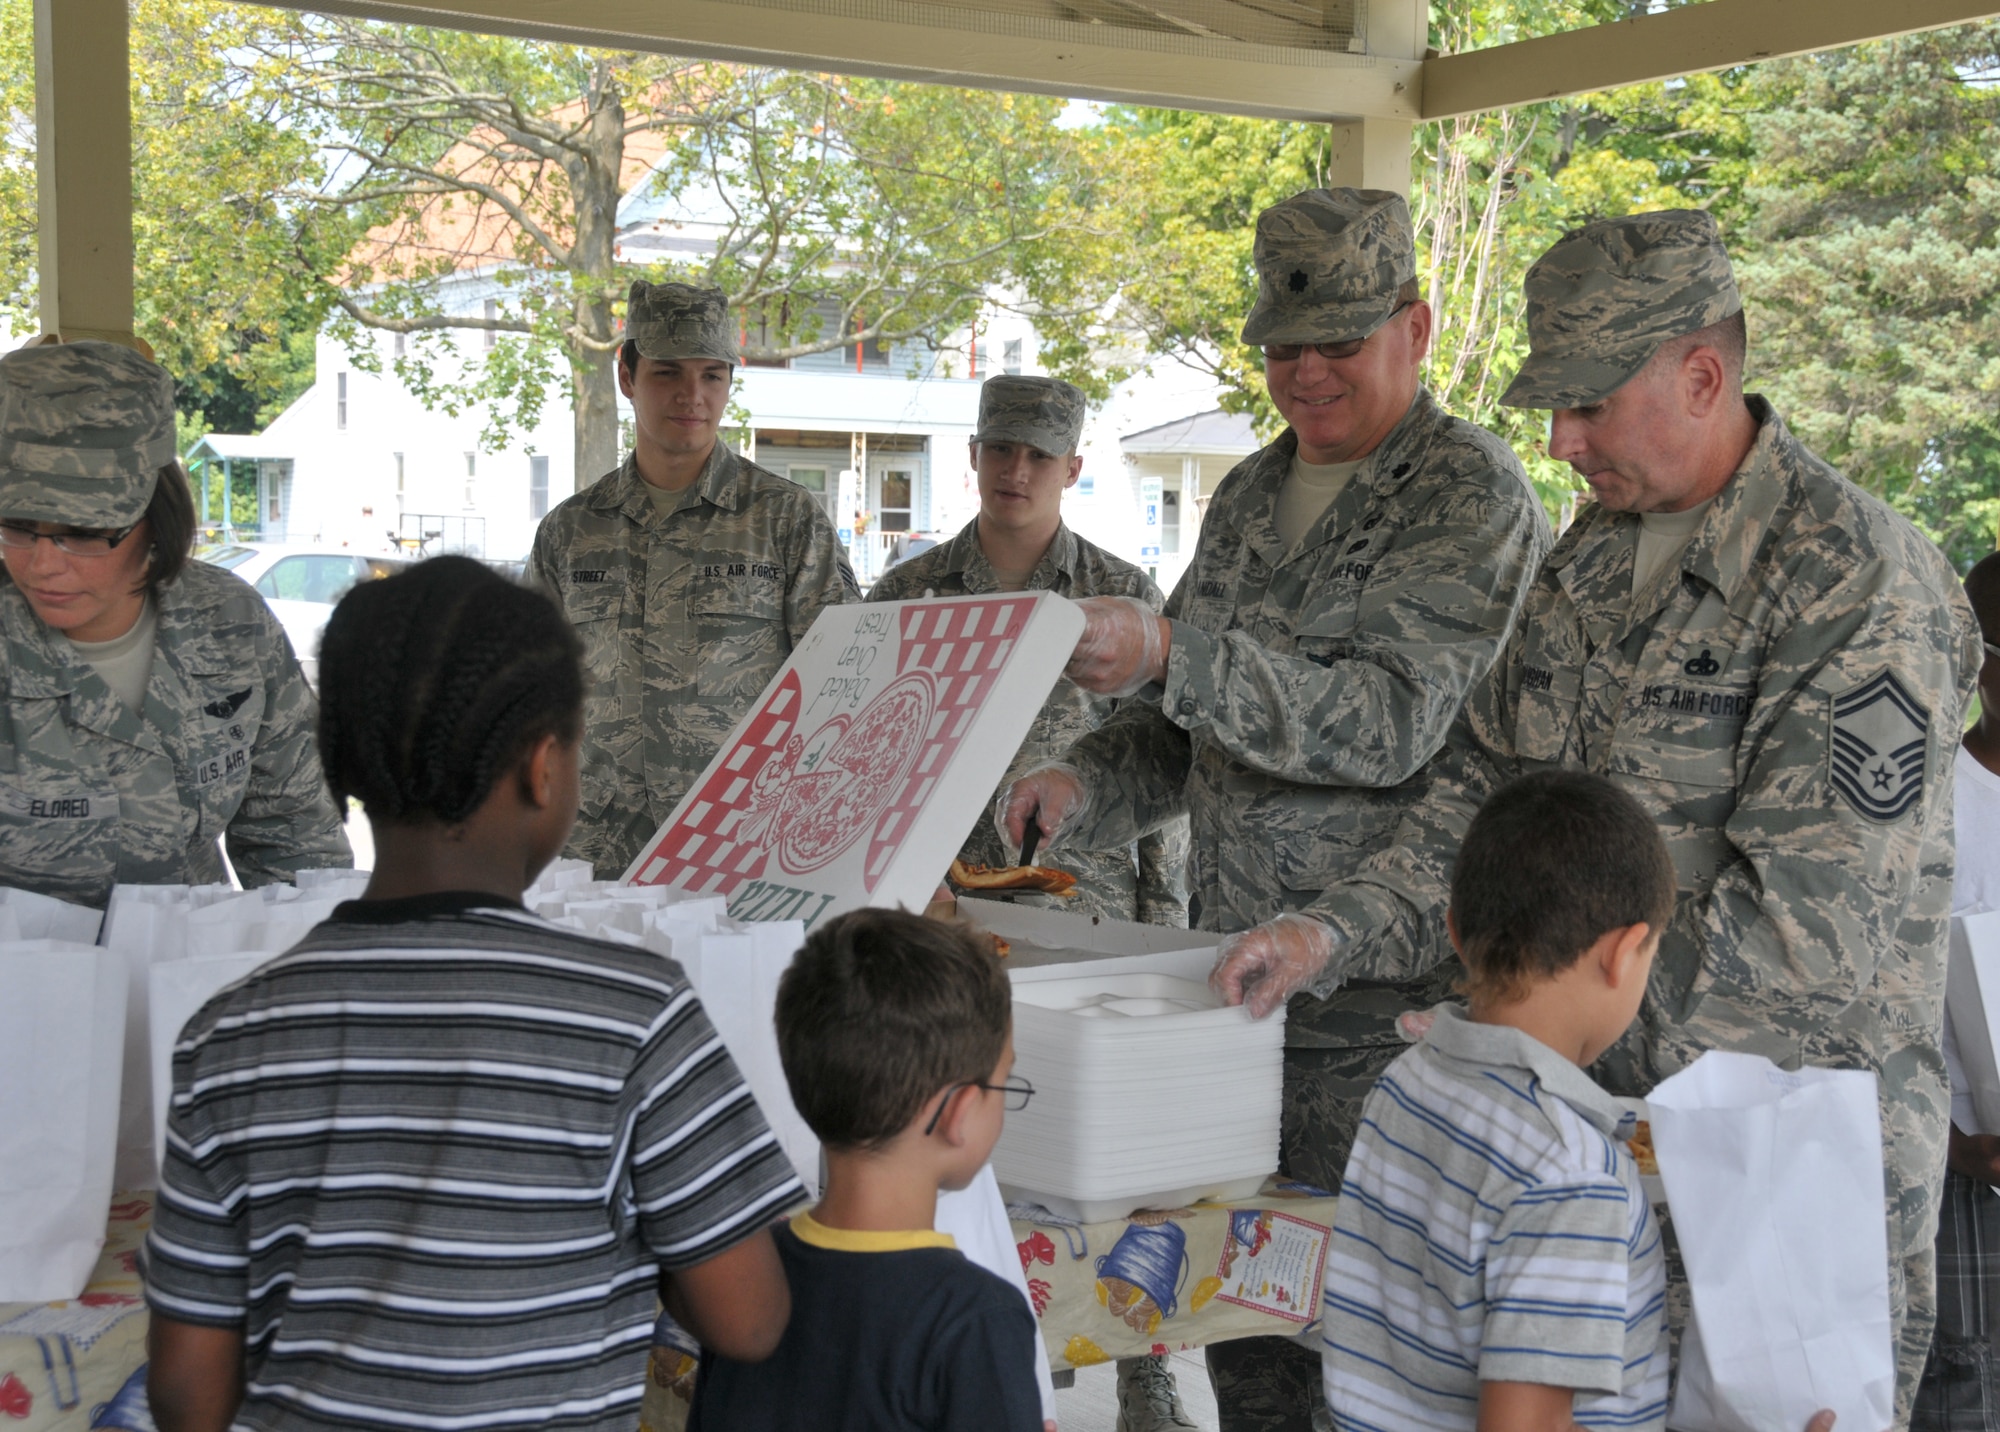 (From left) Tech. Sgt. Sara Eldred, Airman 1st Class Daniel Street, Airman 1st Class Elijah Hammond-Wood, Lt. Col. Ty Randall and Senior Master Sgt. Kevin Moughan hand out lunches to youth at Steinmetz Park in Schenectady, New York, July 25, 2014. About 30 Airmen from the 109th Airlift Wing volunteered throughout the week to help with Schenectady Inner City Ministry's Summer Lunch Program. The ministry has been providing free lunches to youth throughout Schenectady for 20 years. Eldred, Street, and Hammond-Wood are all with the 139th Aeromedical Evacuation Squadron; Randall is the 109th Civil Engineer Squadron commander; and Moughan is assigned to the 109th Maintenance Group. (U.S. Air National Guard photo by Tech. Sgt. Catharine Schmidt/Released)